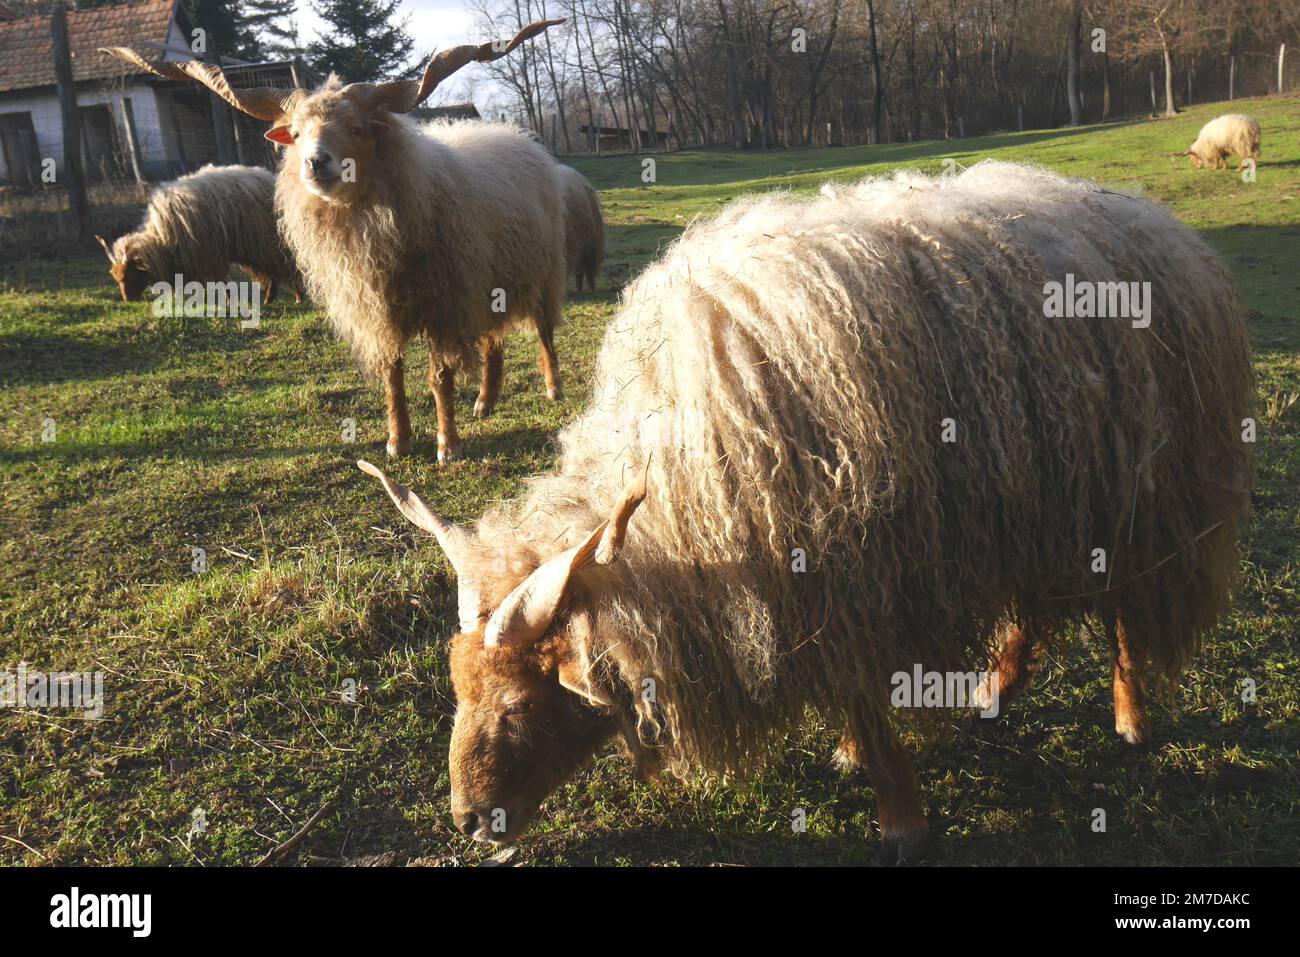 A flock of Hungarian Hortobagy Racka sheep with distinctive spiral horns in a field, Szigethalom, Hungary Stock Photo